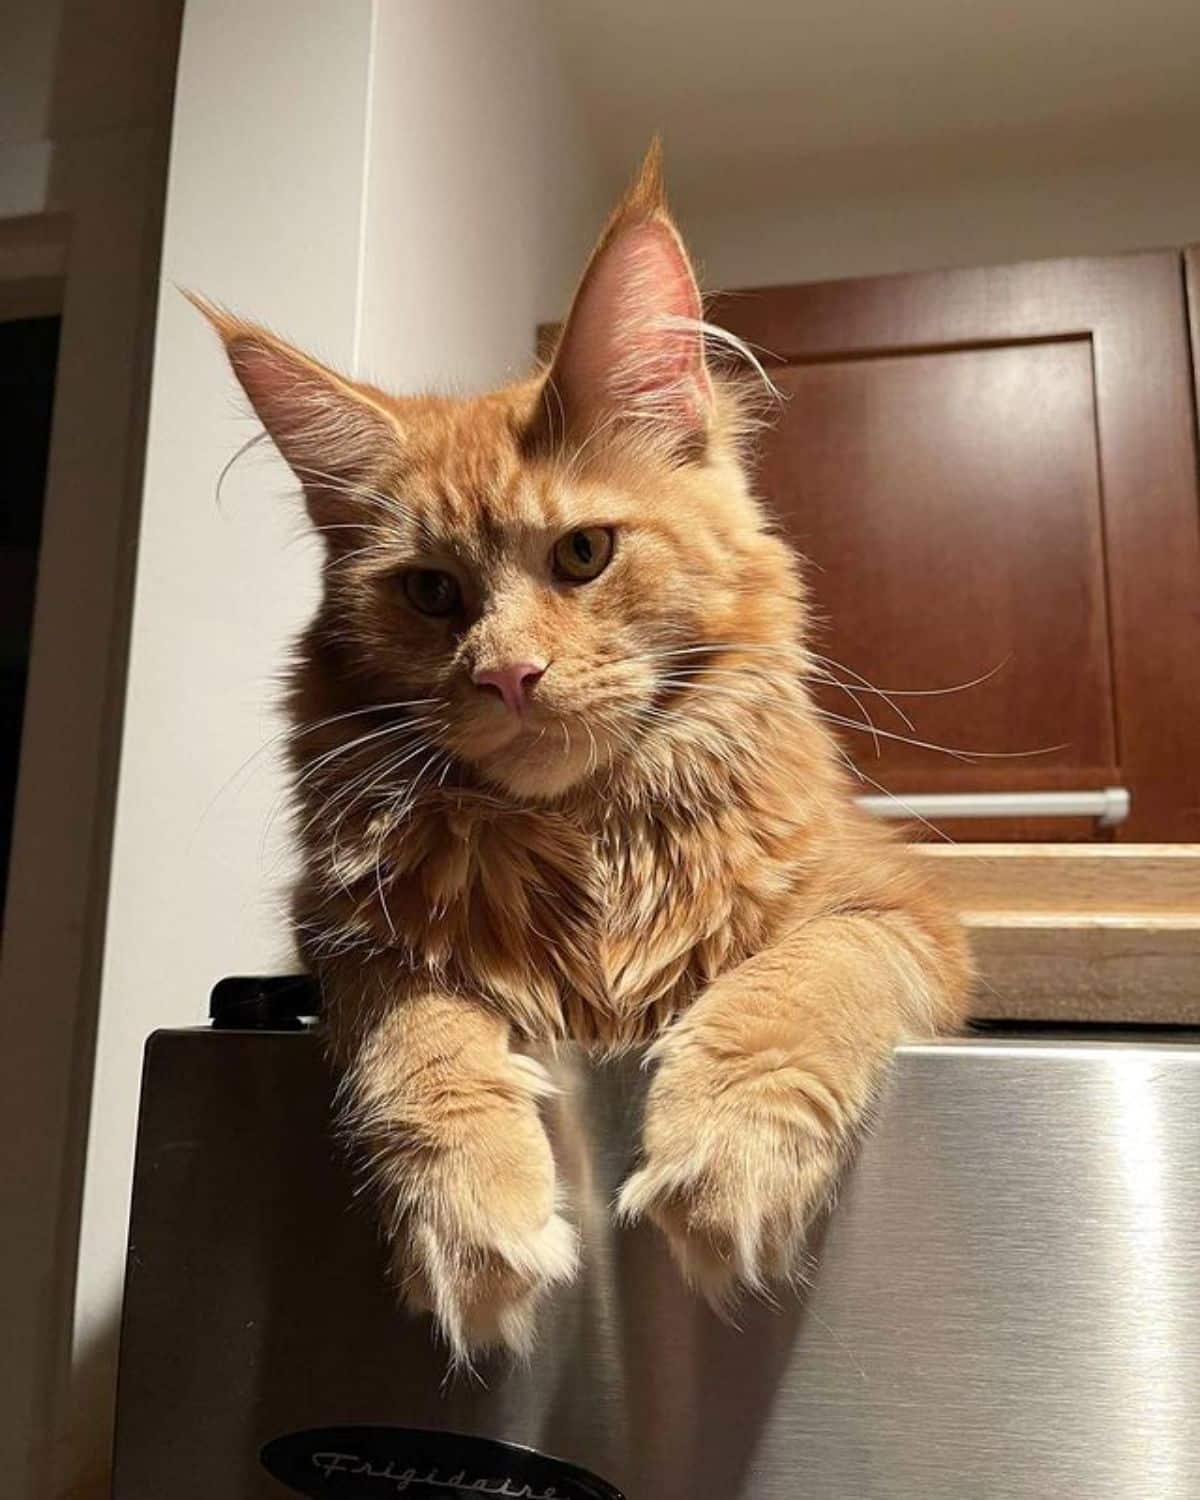 A fluffy ginger maine coon lying on a top of fridge.